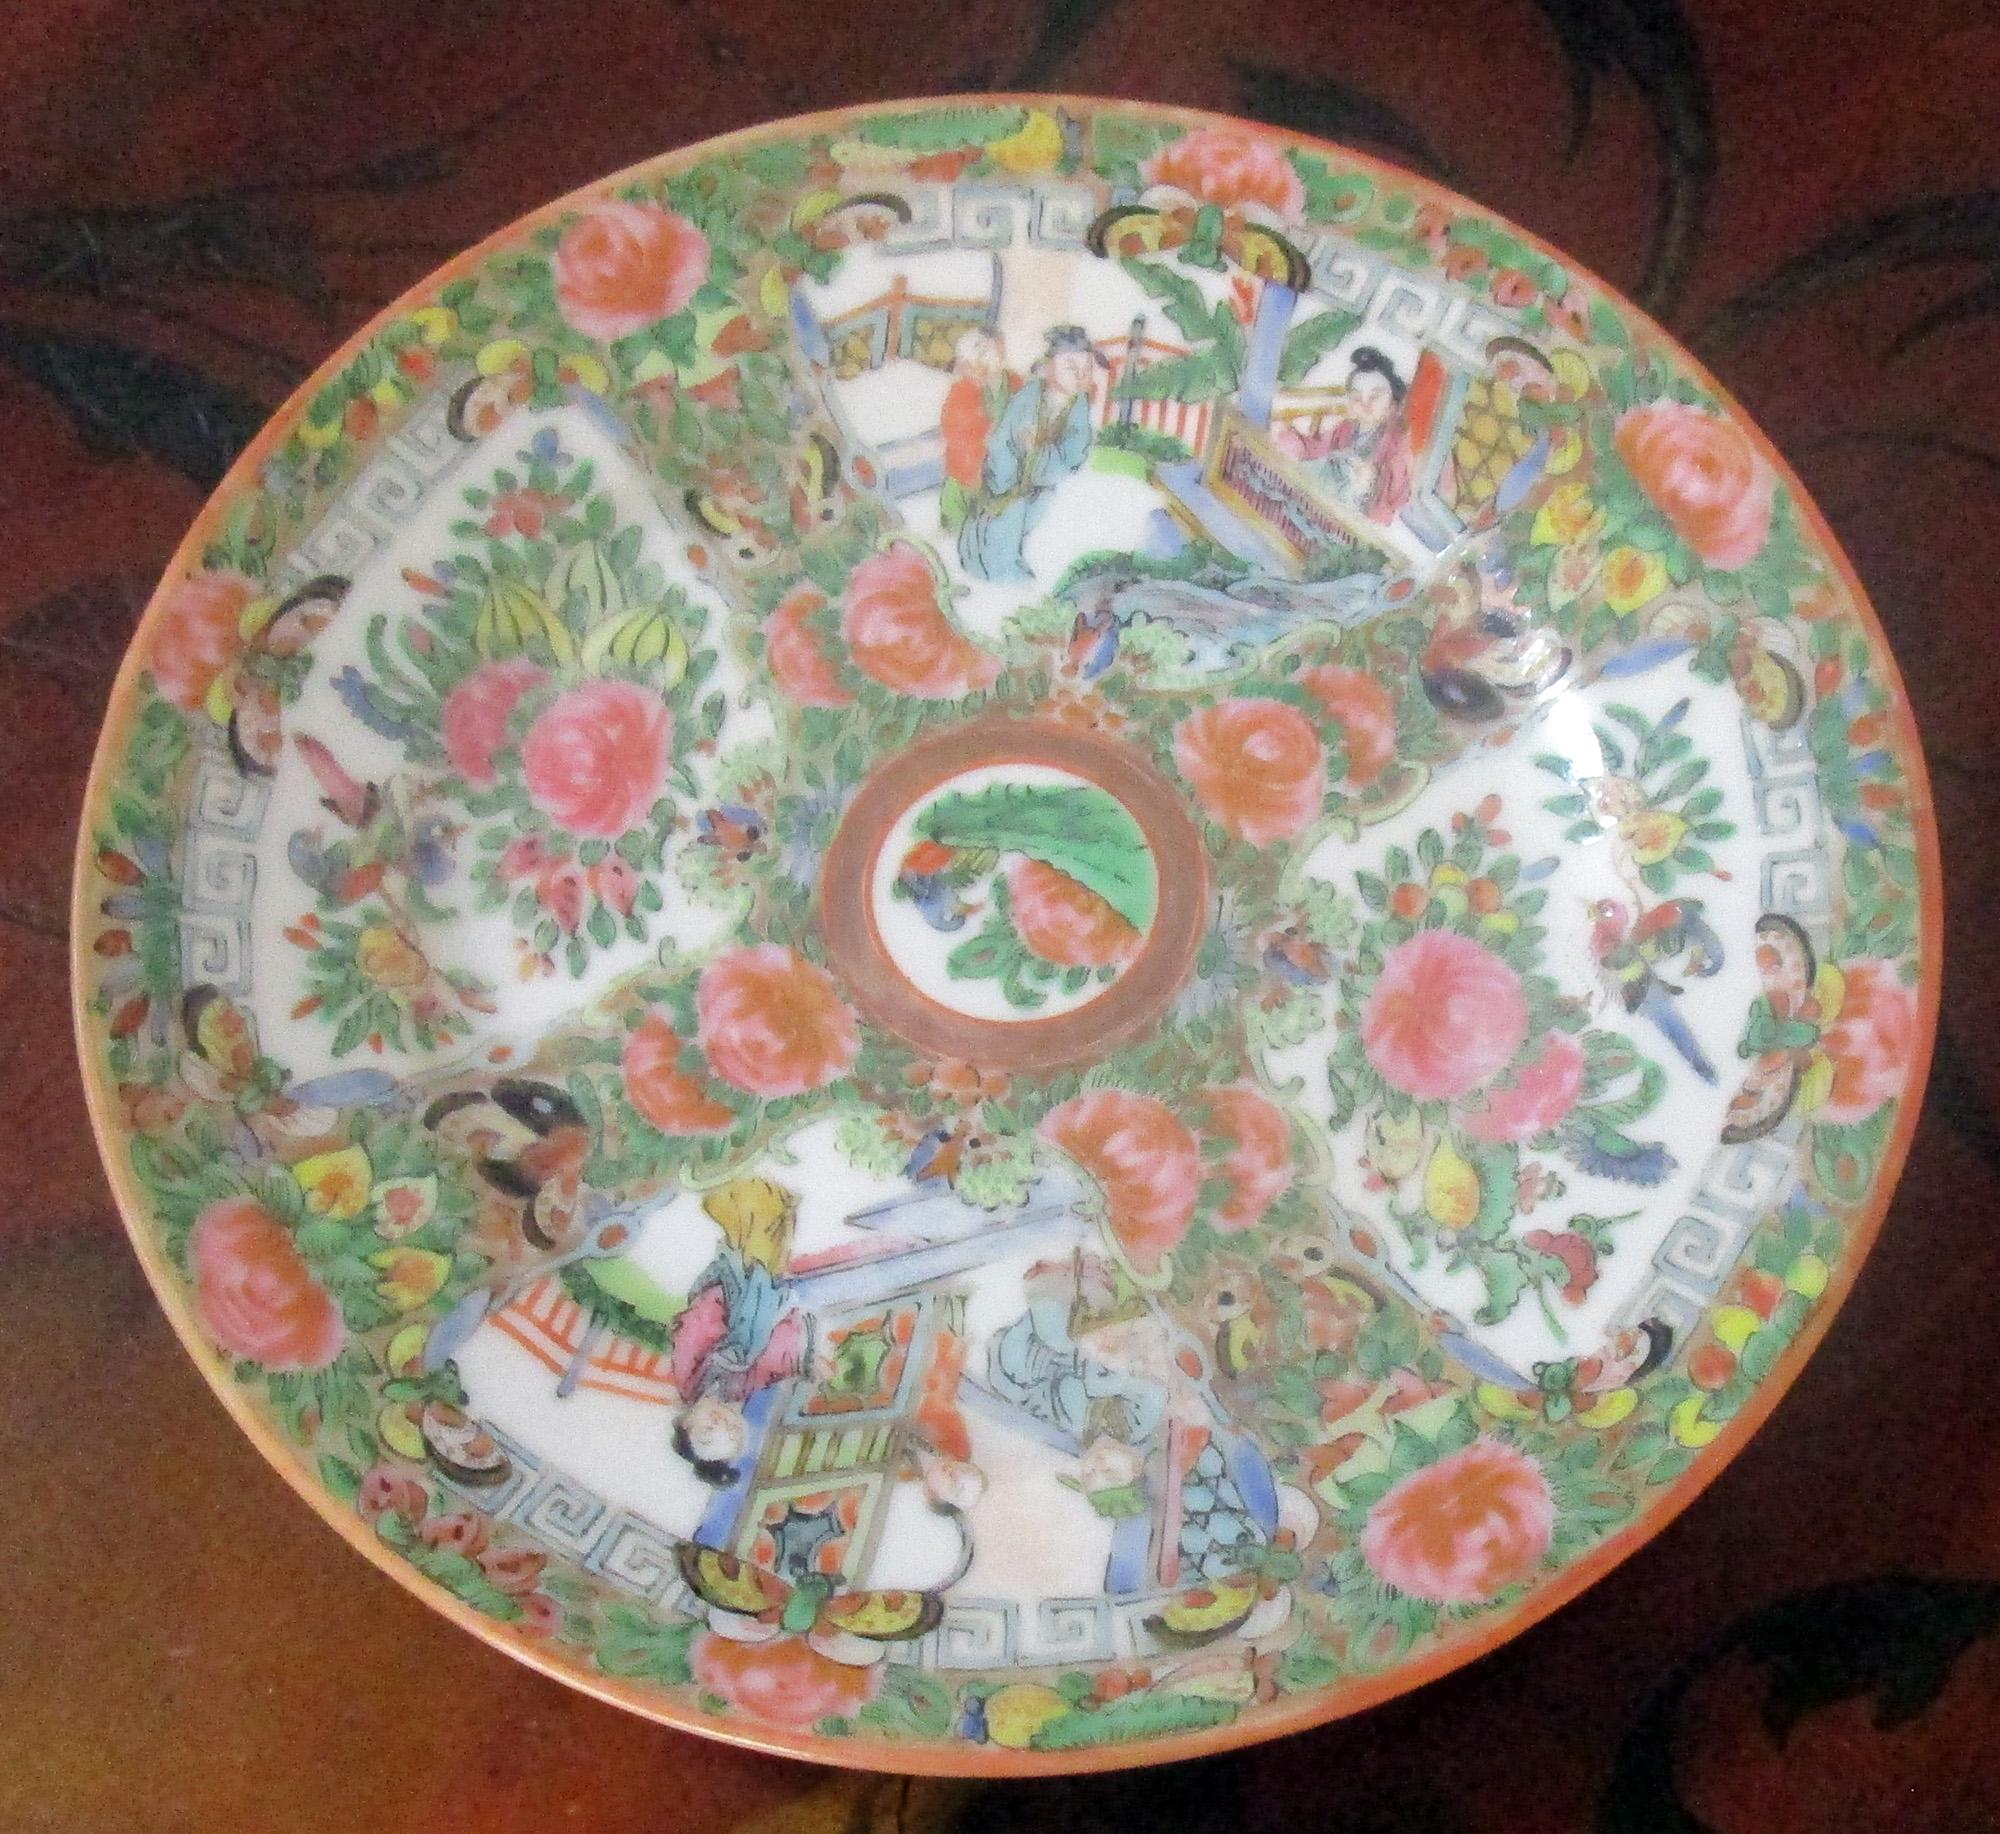 Set of four Chinese export late Qing period rose medallion dessert plates featuring traditional medallion design with figures in scenes, floral and bird panels. Pink rose central medallion. Greek key pattern border on three of the plates.
See